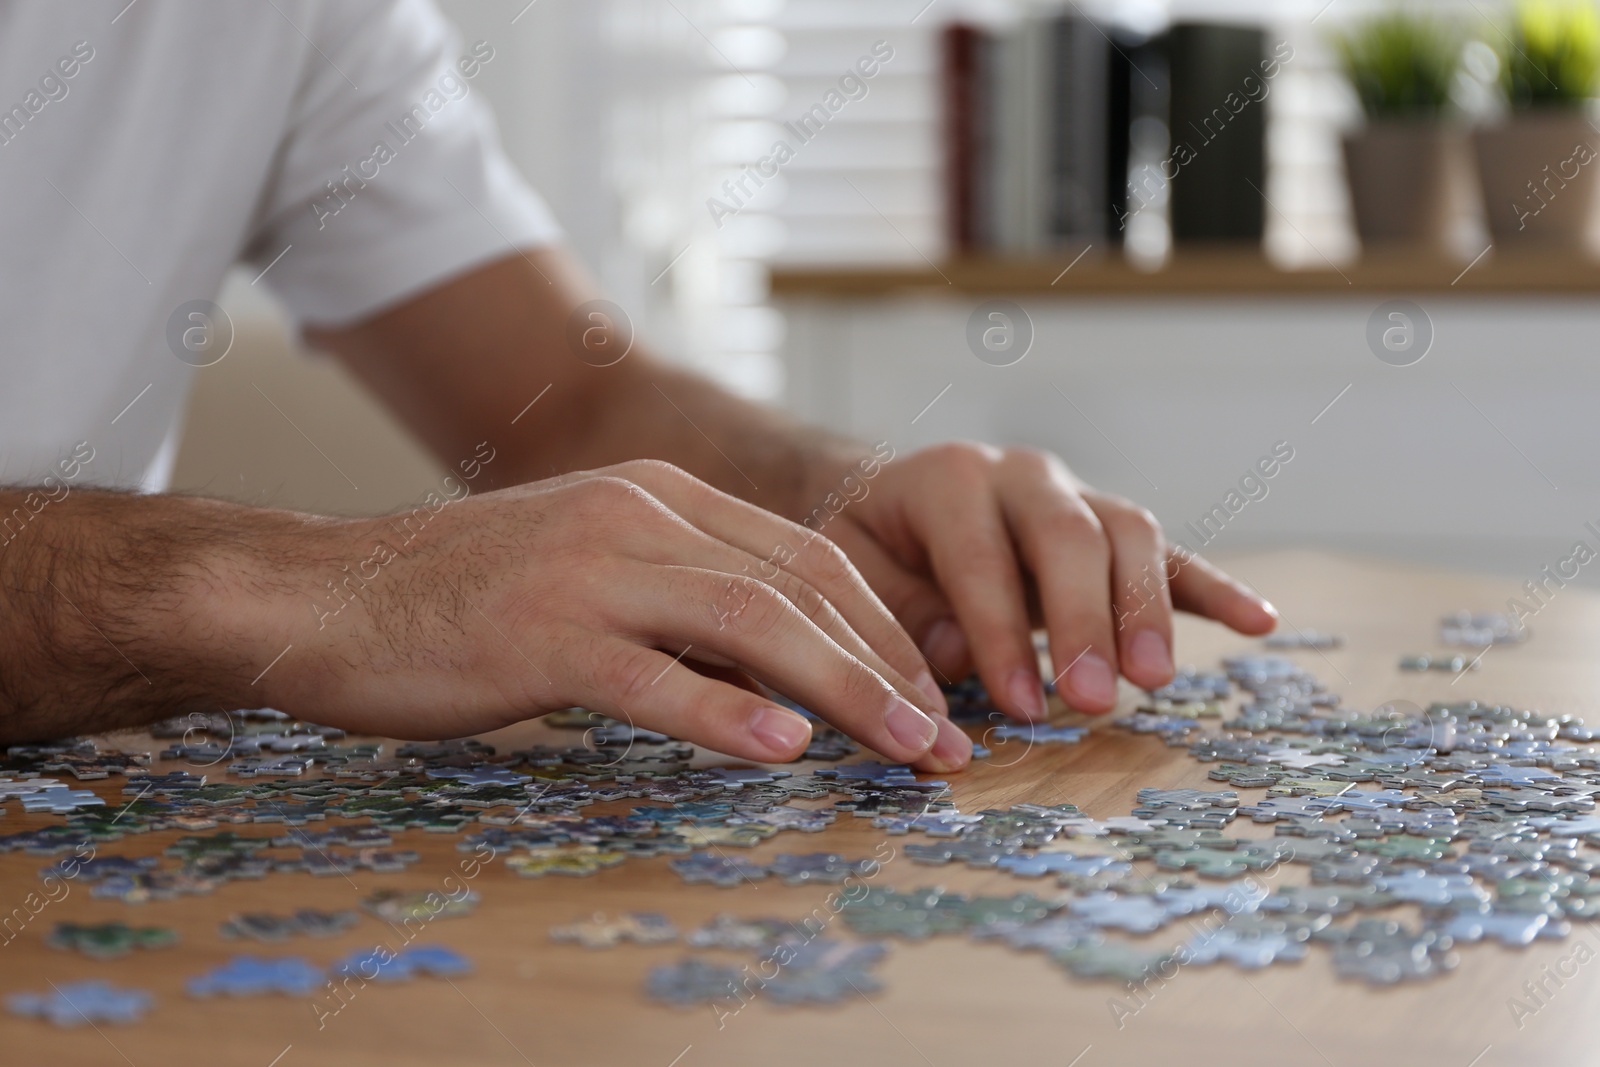 Photo of Man playing with puzzles at wooden table indoors, closeup